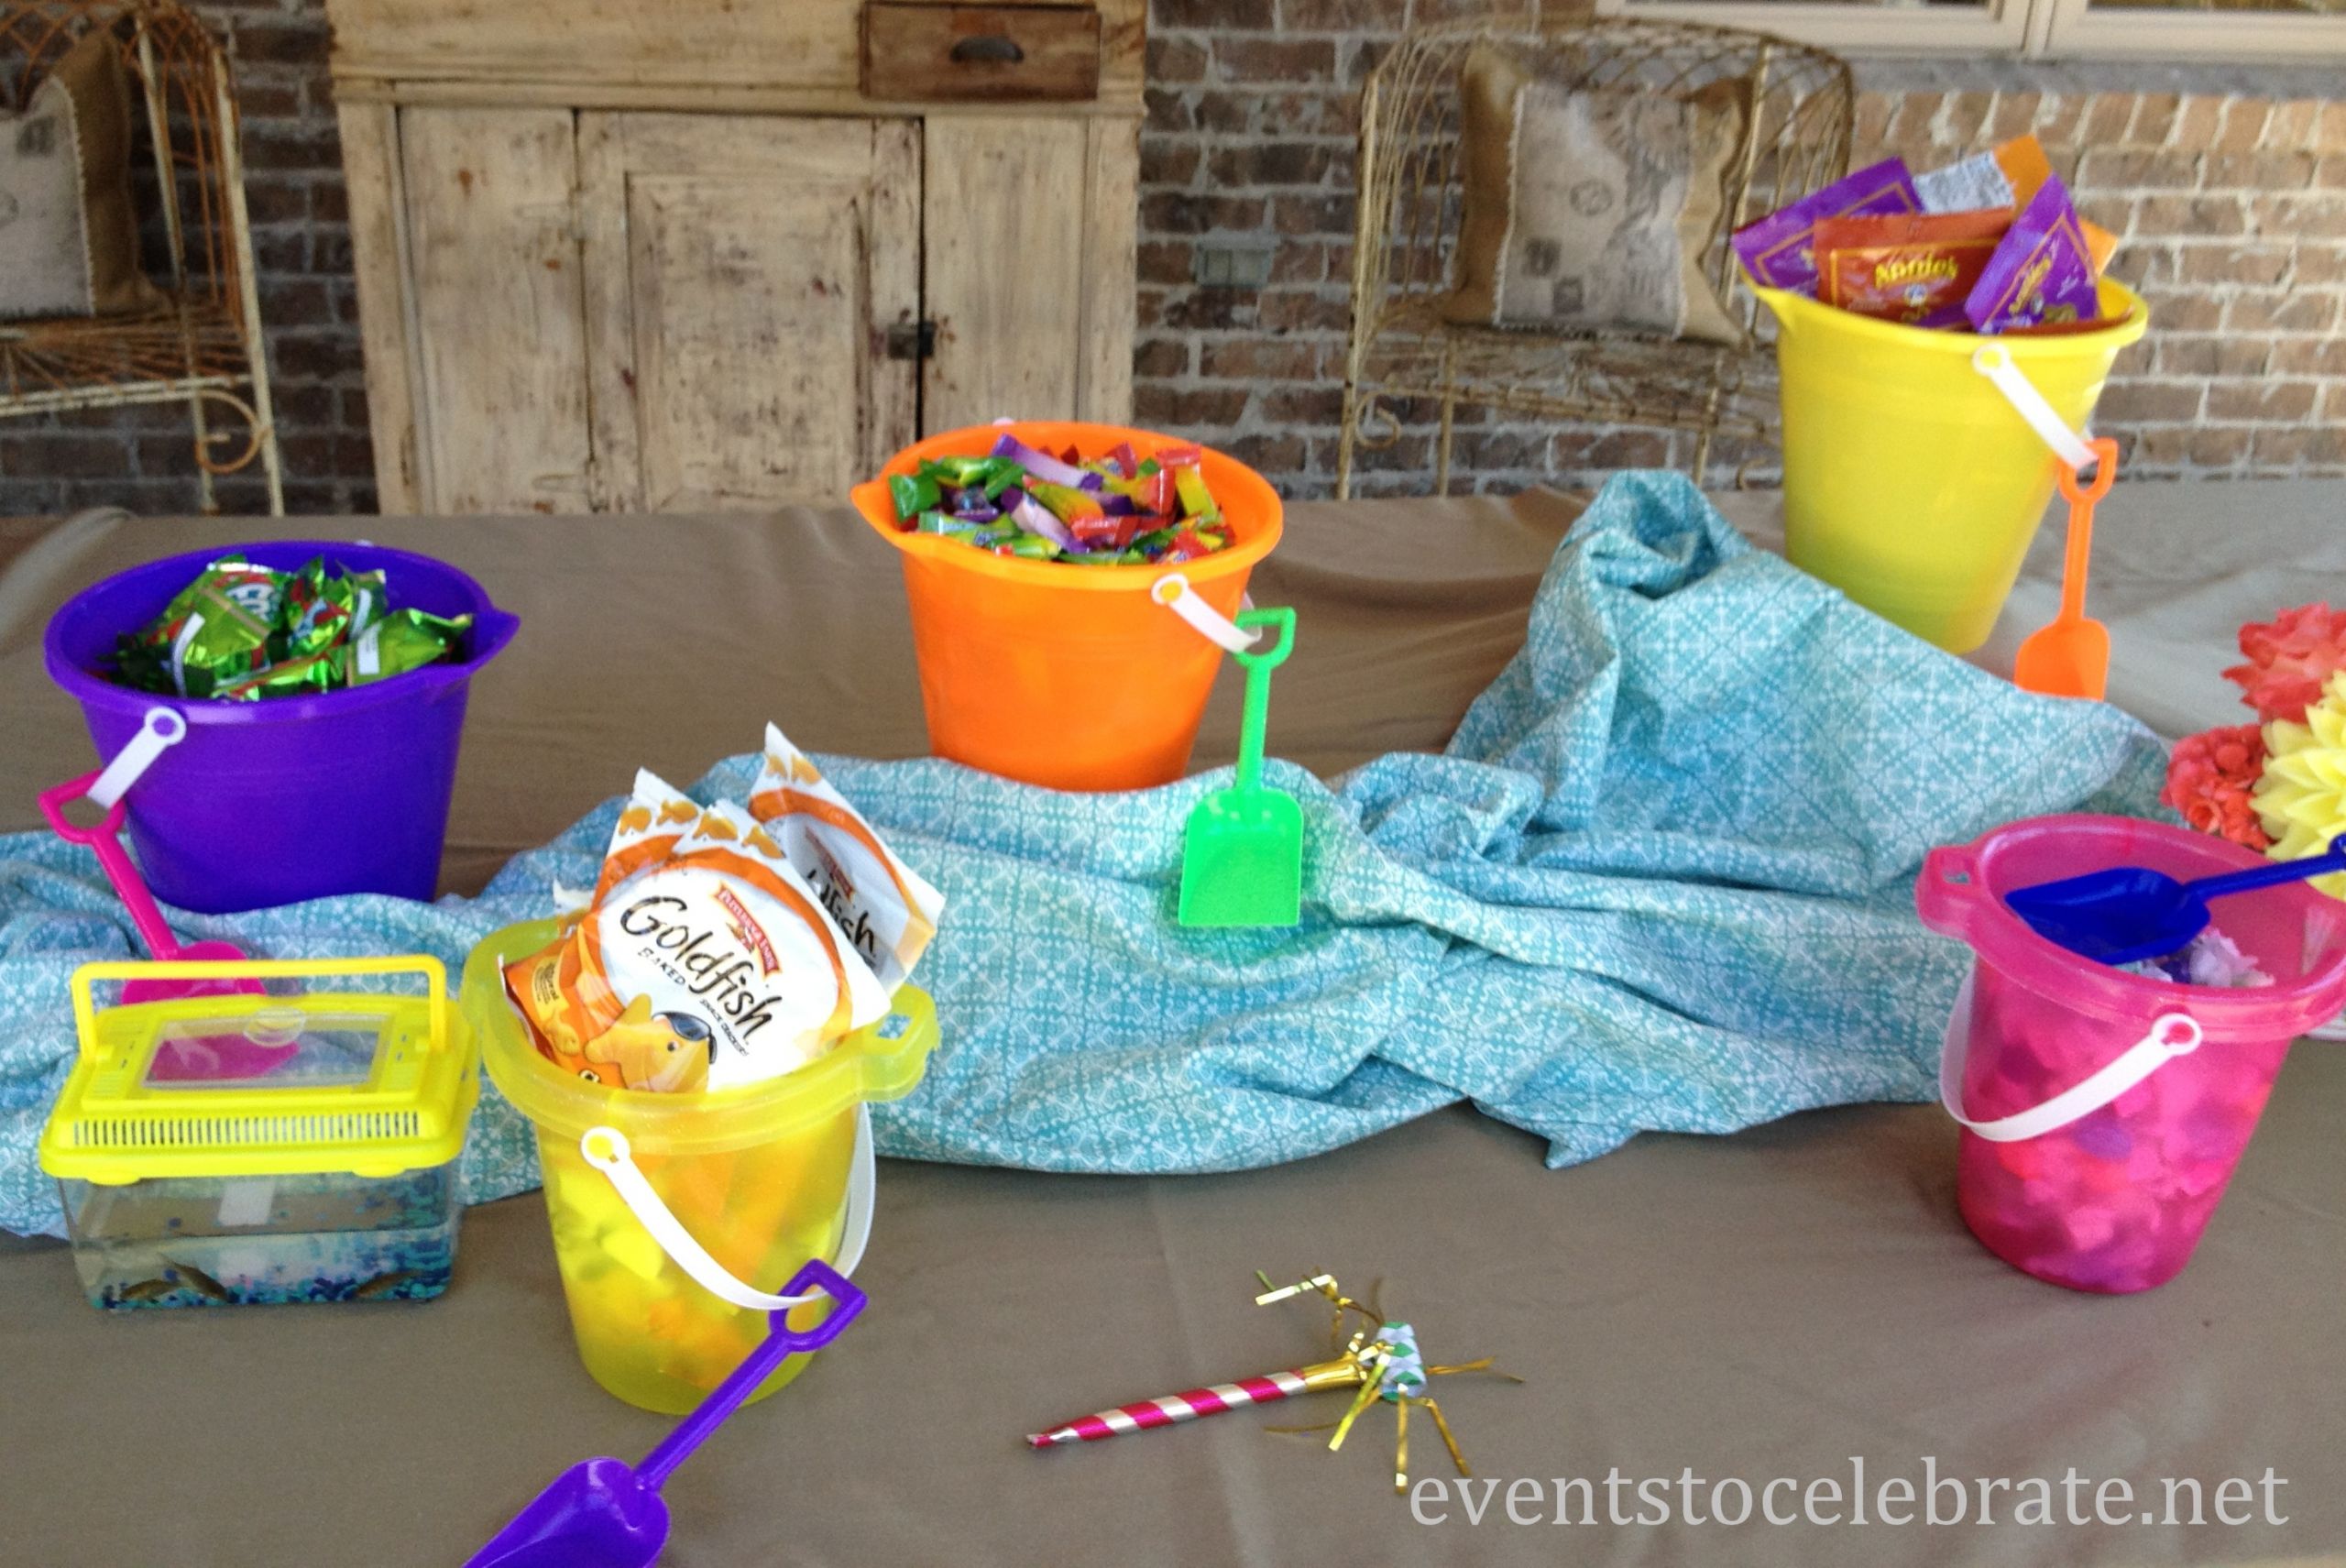 Swim Pool Party Ideas
 Pool Party Ideas events to CELEBRATE